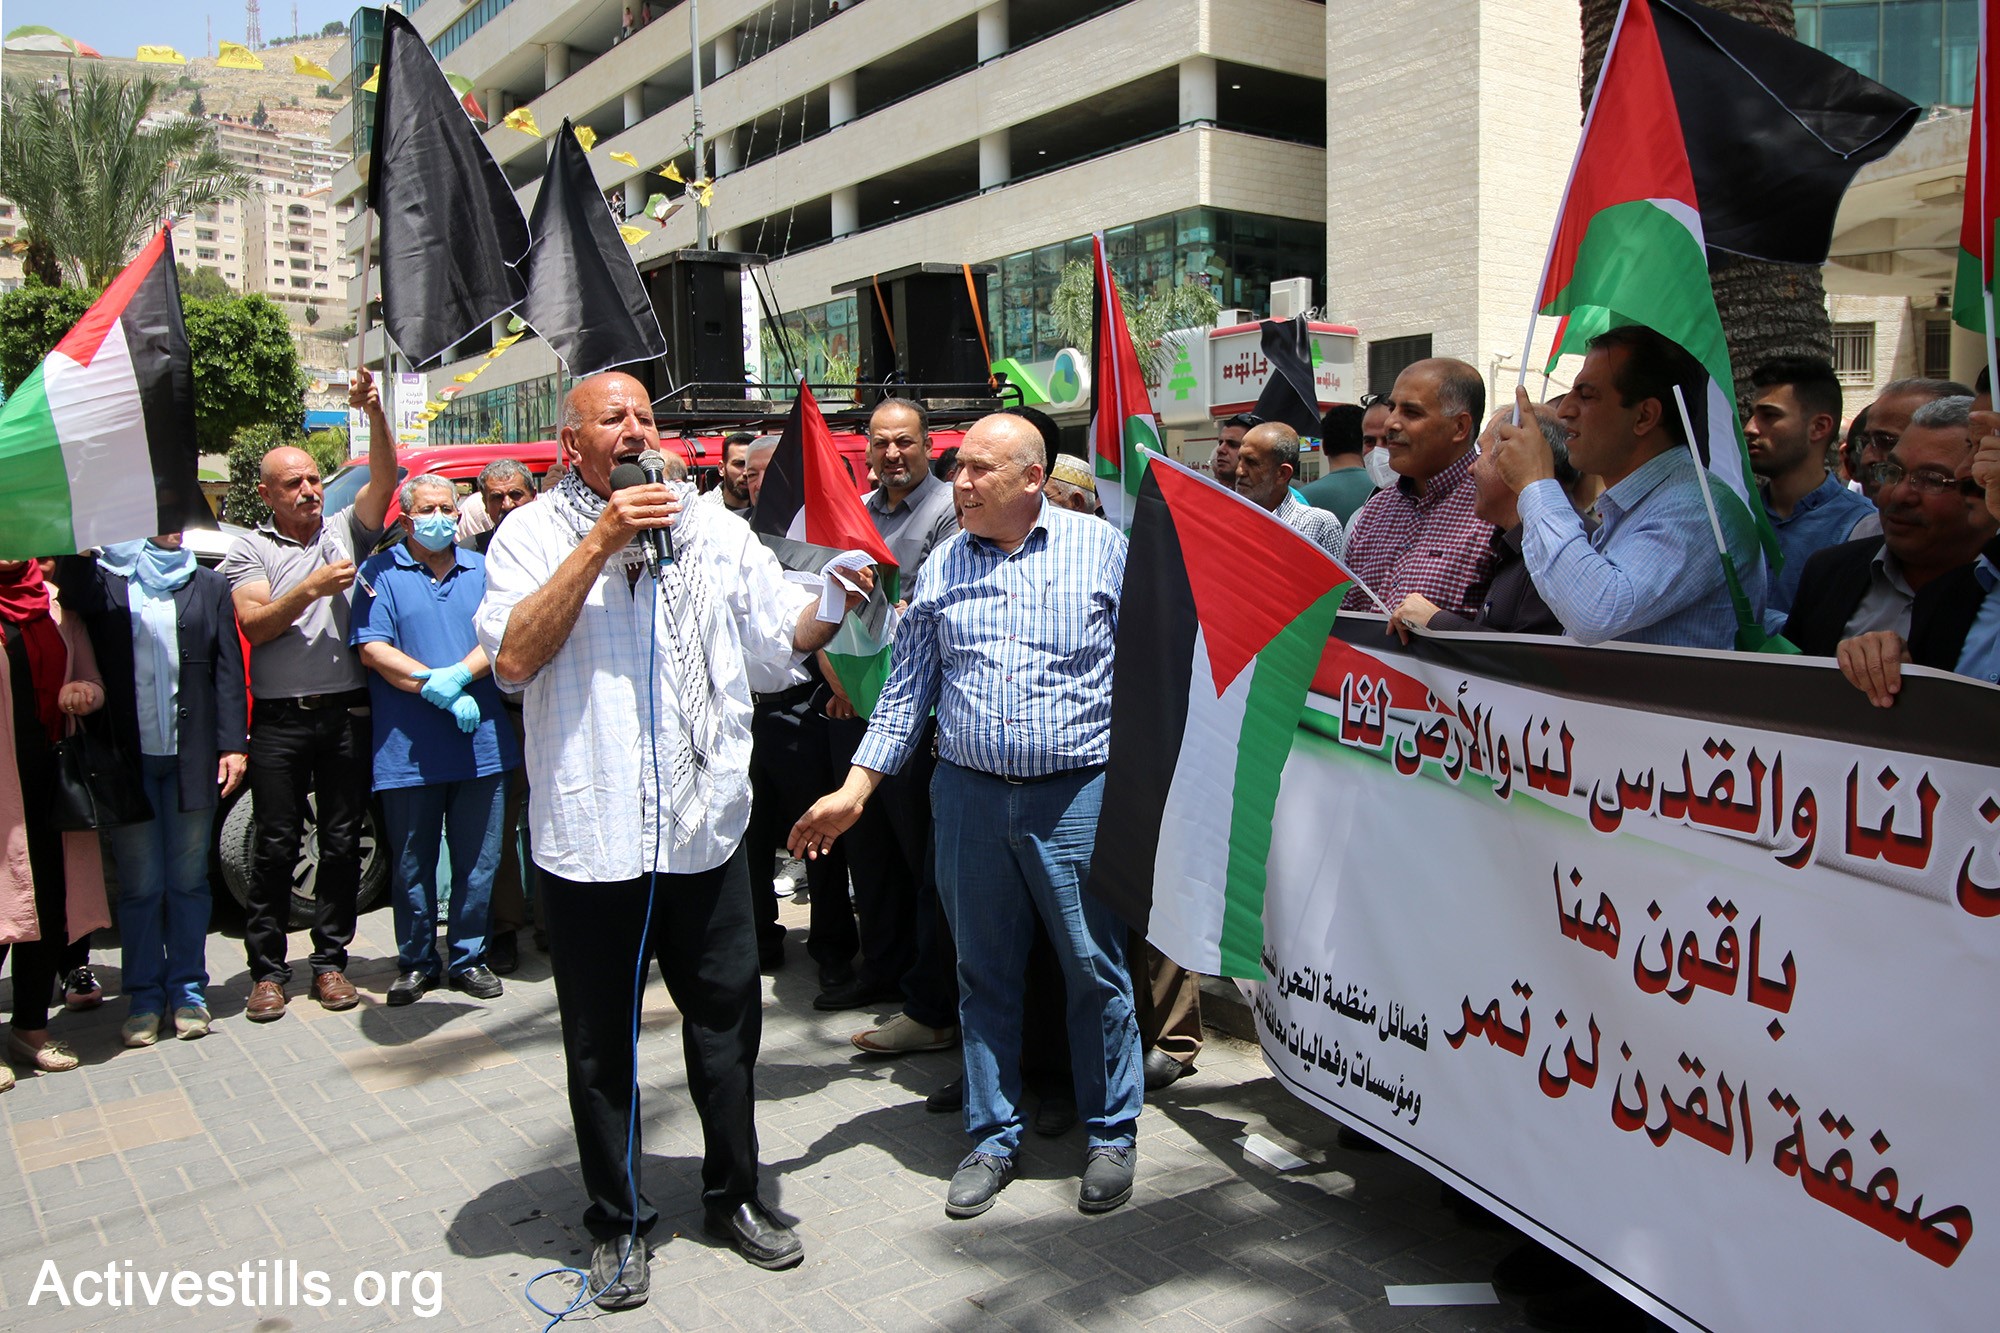 Palestinians protest in Nablus against Israel's plans to annex parts of the occupied West Ban, May 14, 2020. The large banner reads, in part "… Jerusalem is ours and the land is ours; [We are ] staying here; the [US-Israeli] 'Deal of the Century' will not pass."